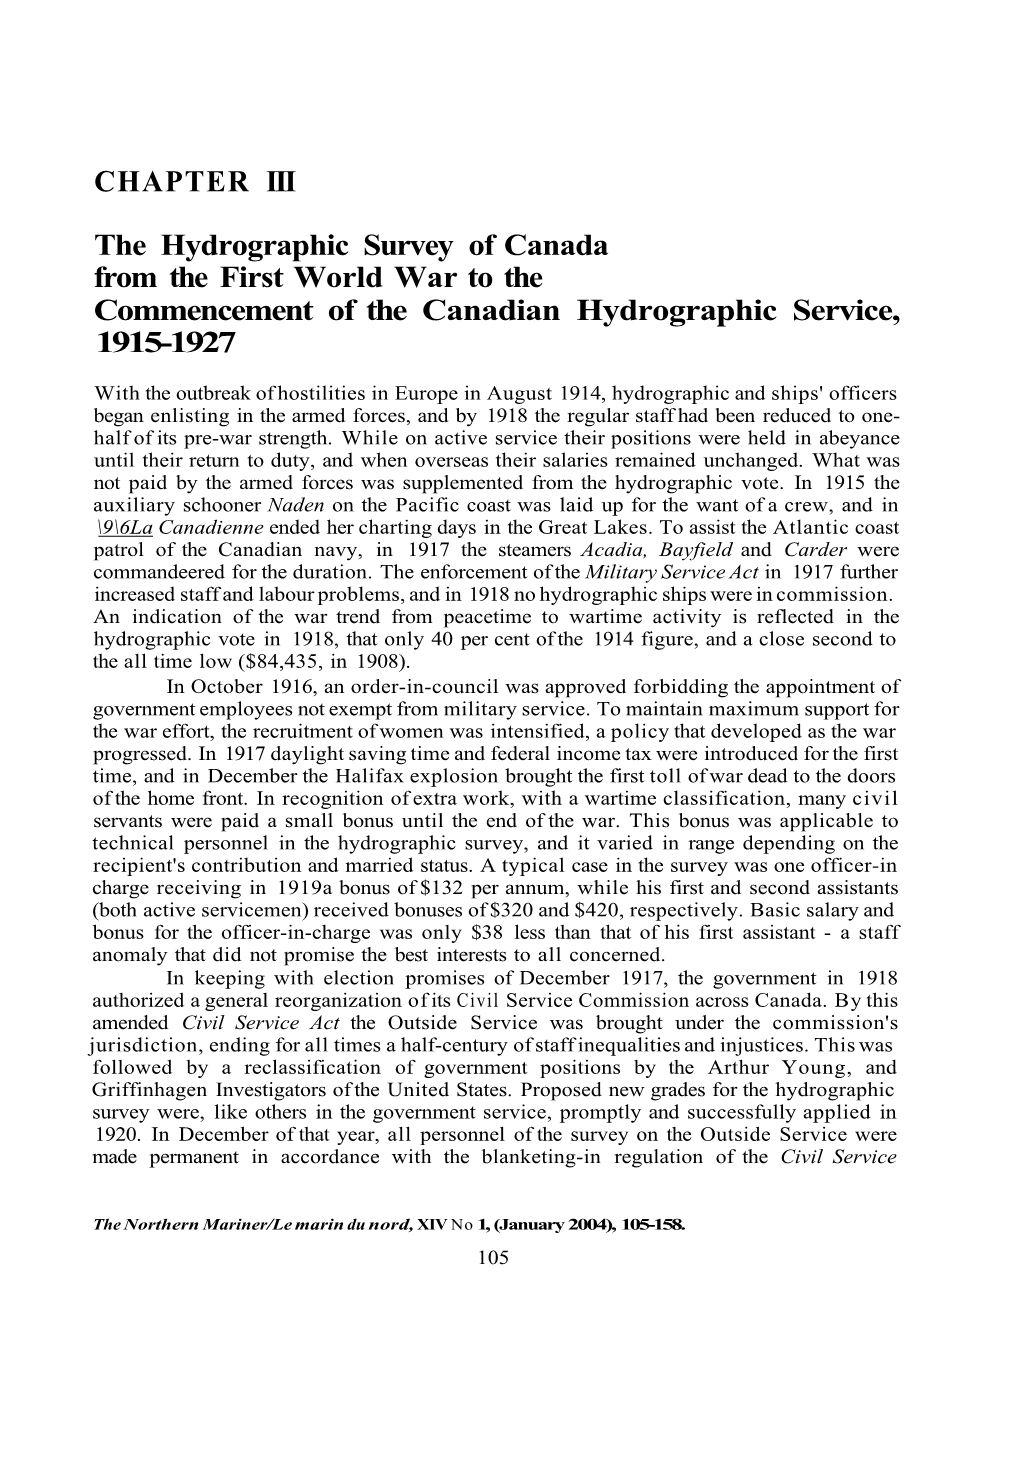 The Hydrographic Survey of Canada from the First World War to the Commencement of the Canadian Hydrographic Service, 1915-1927